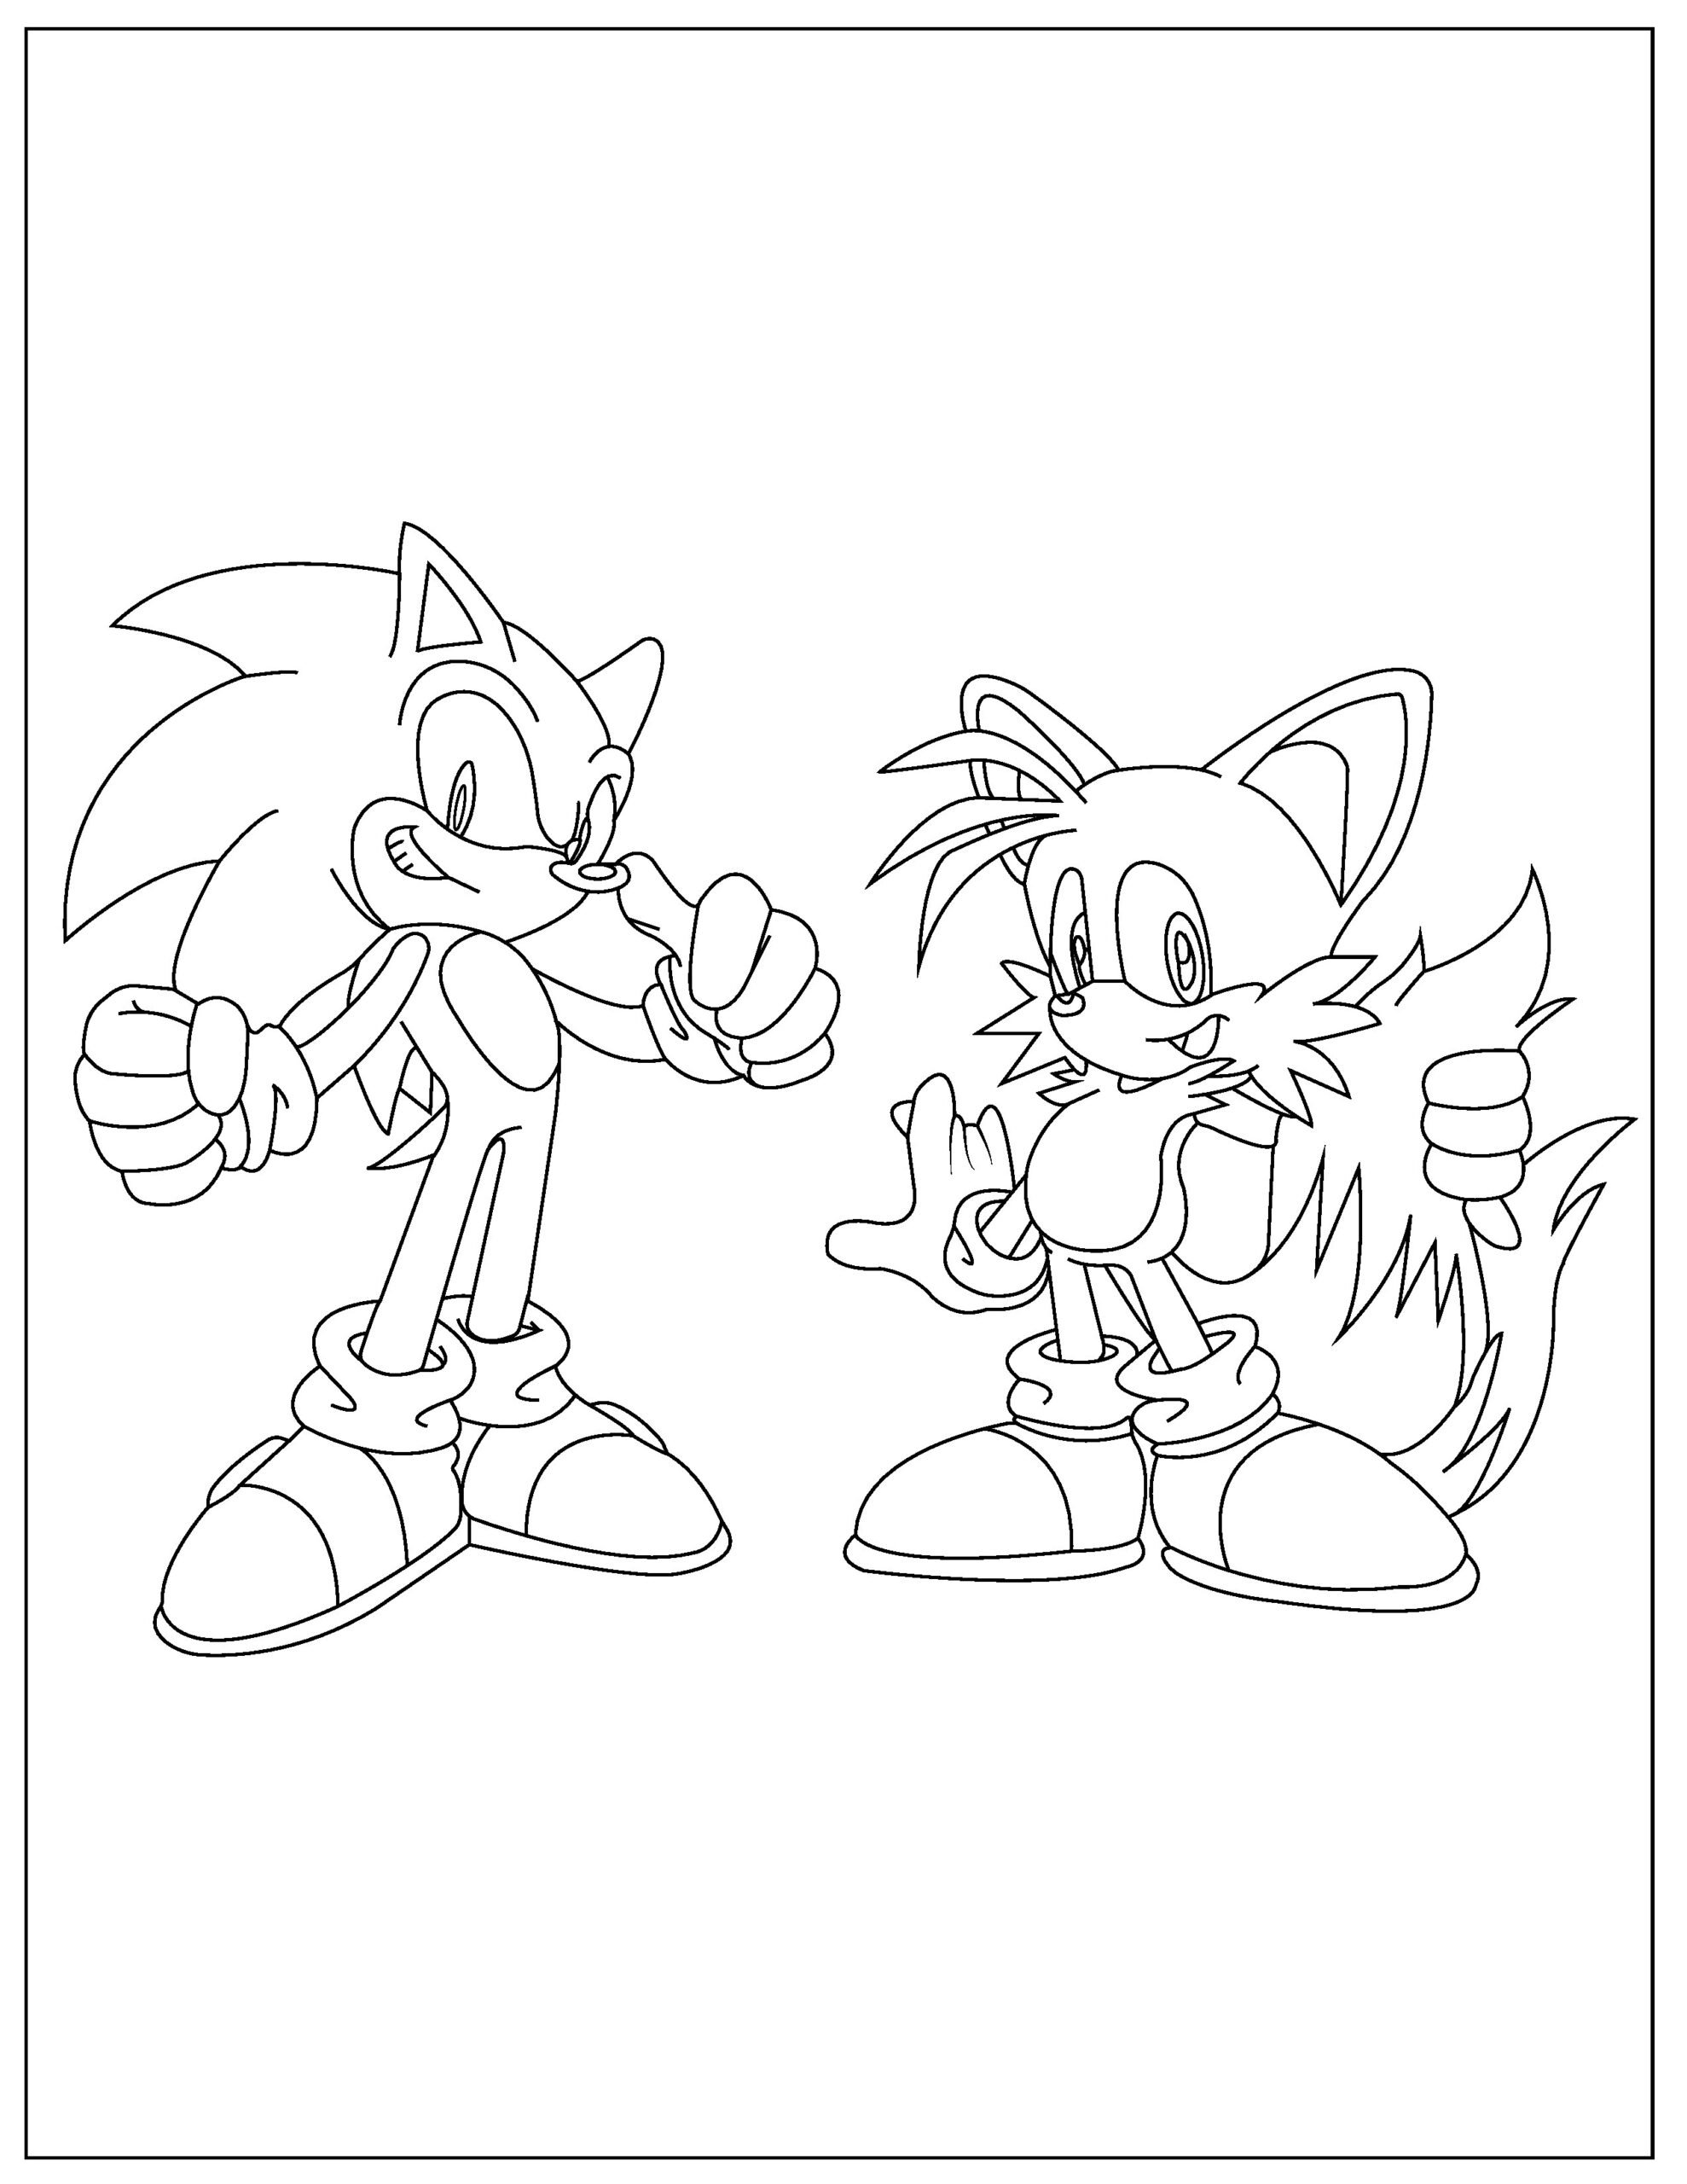 Sonic 2 Coloring Pages - Sonic The Hedgehog 2 Coloring Pages